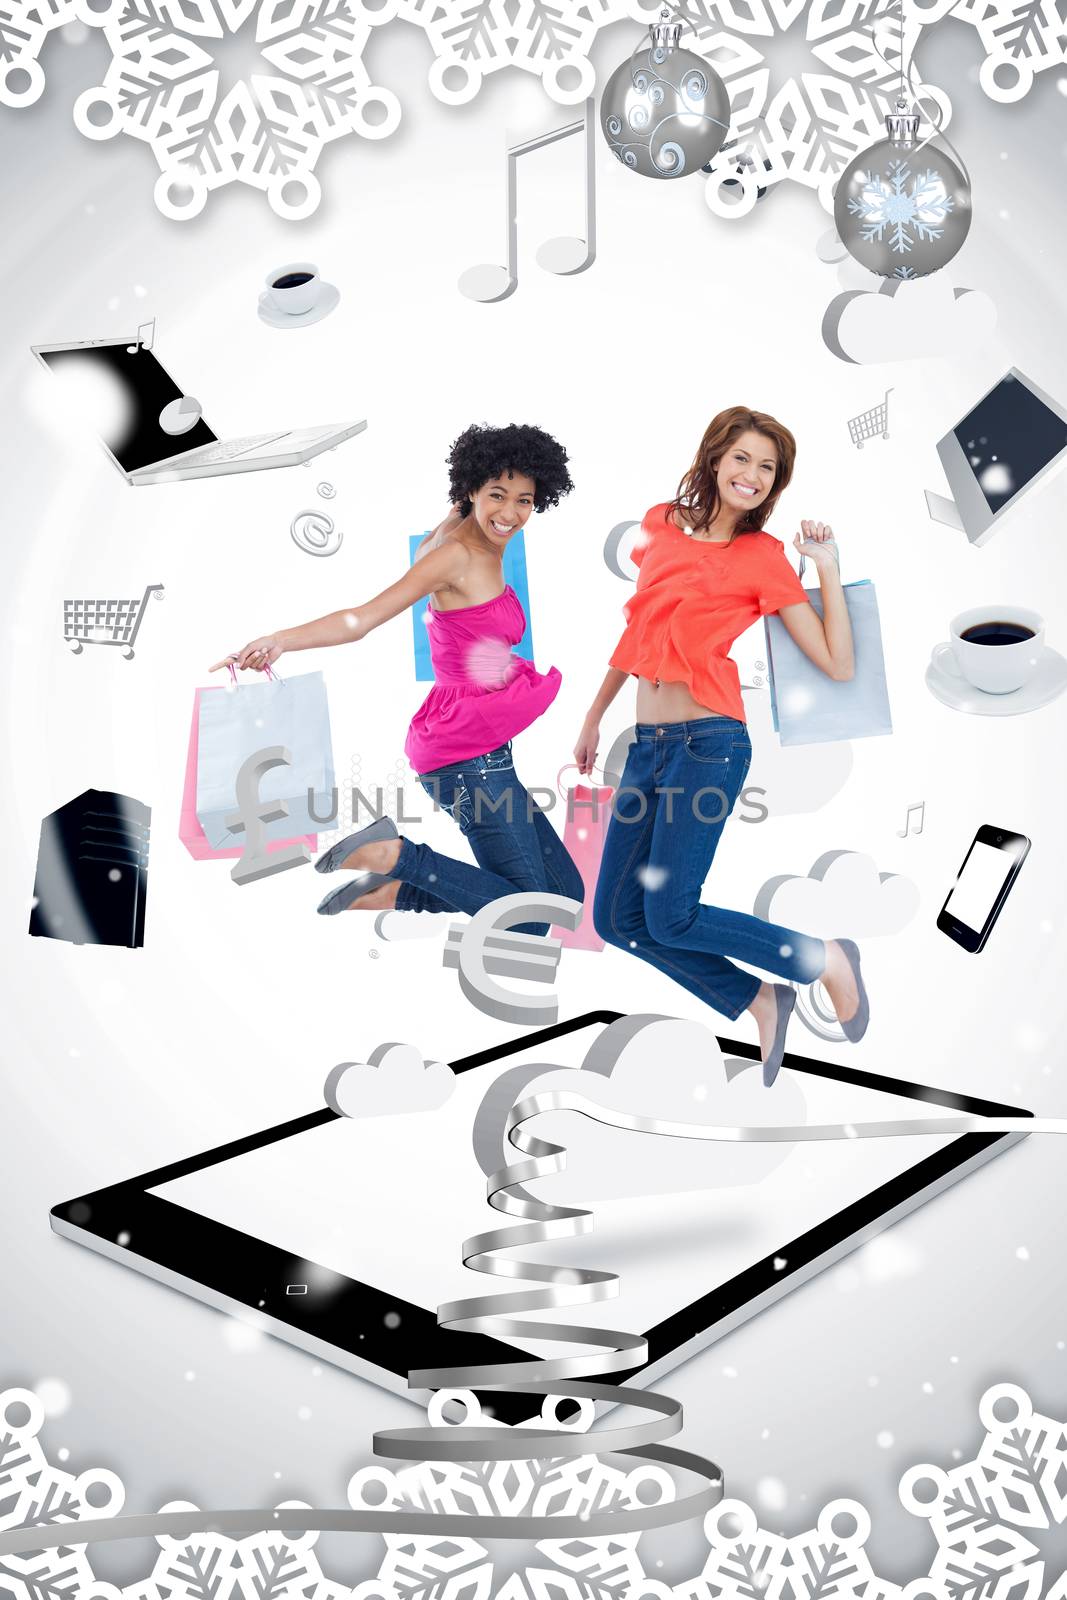 Two smiling women jumping on a tablet pc  against snow falling